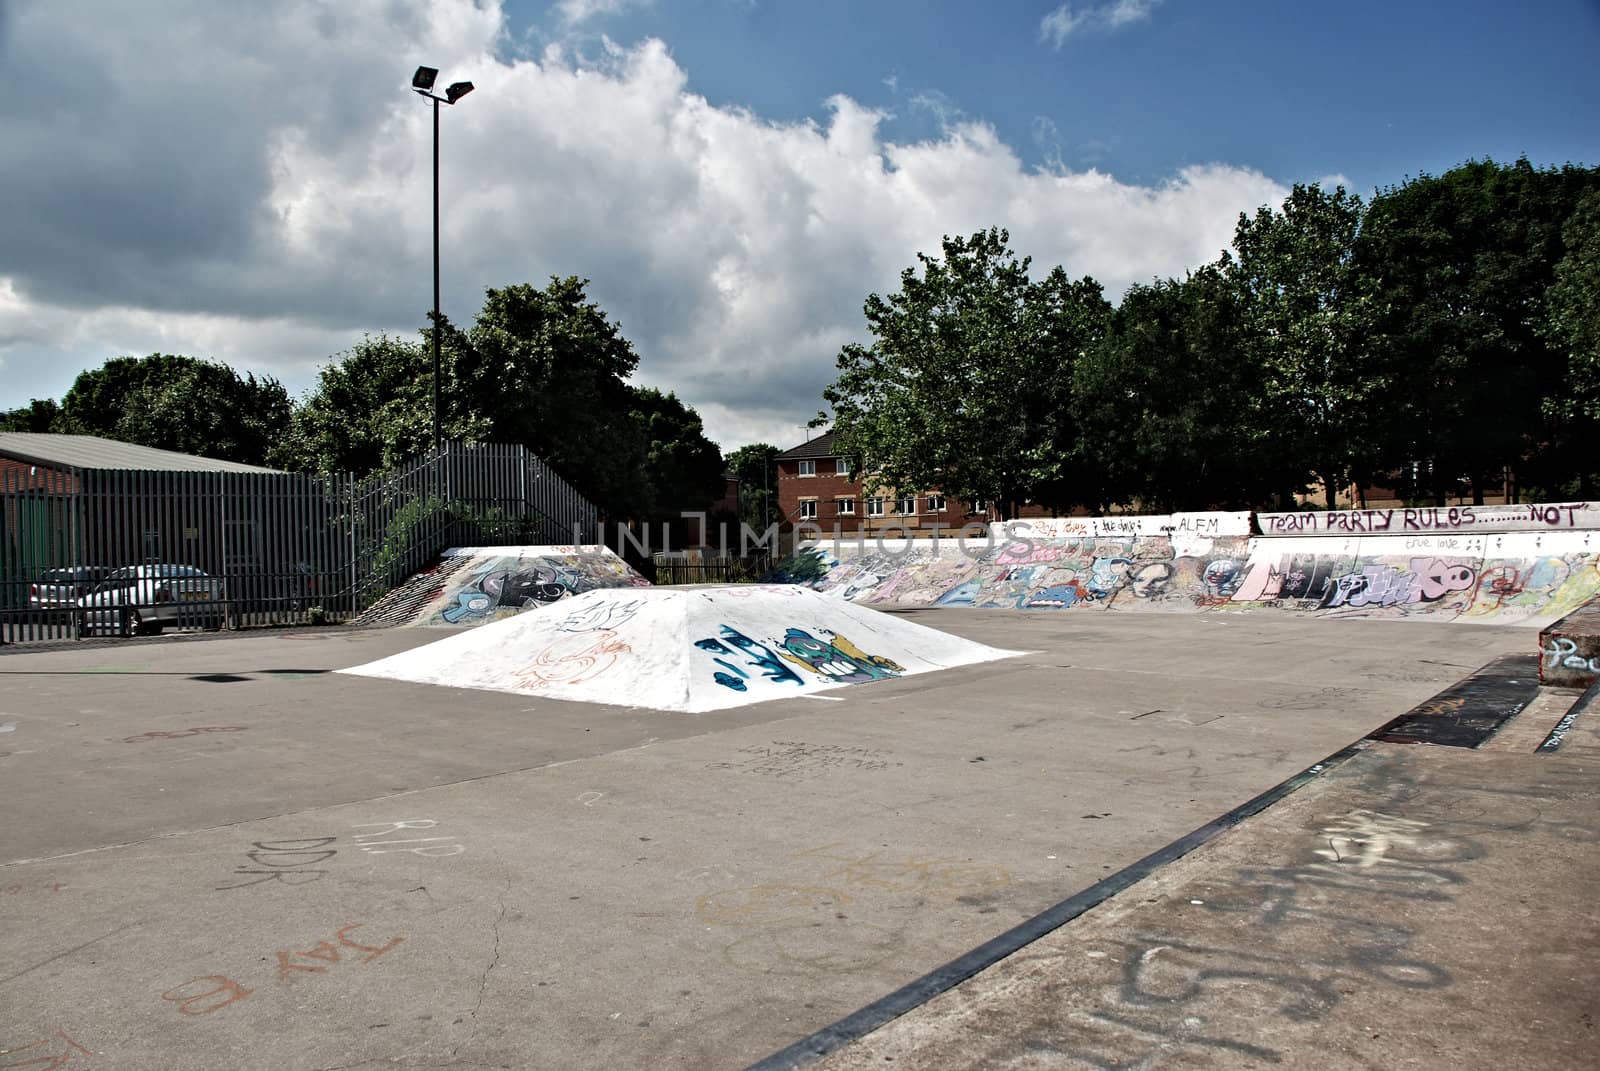 Skate Park Ramps by pwillitts